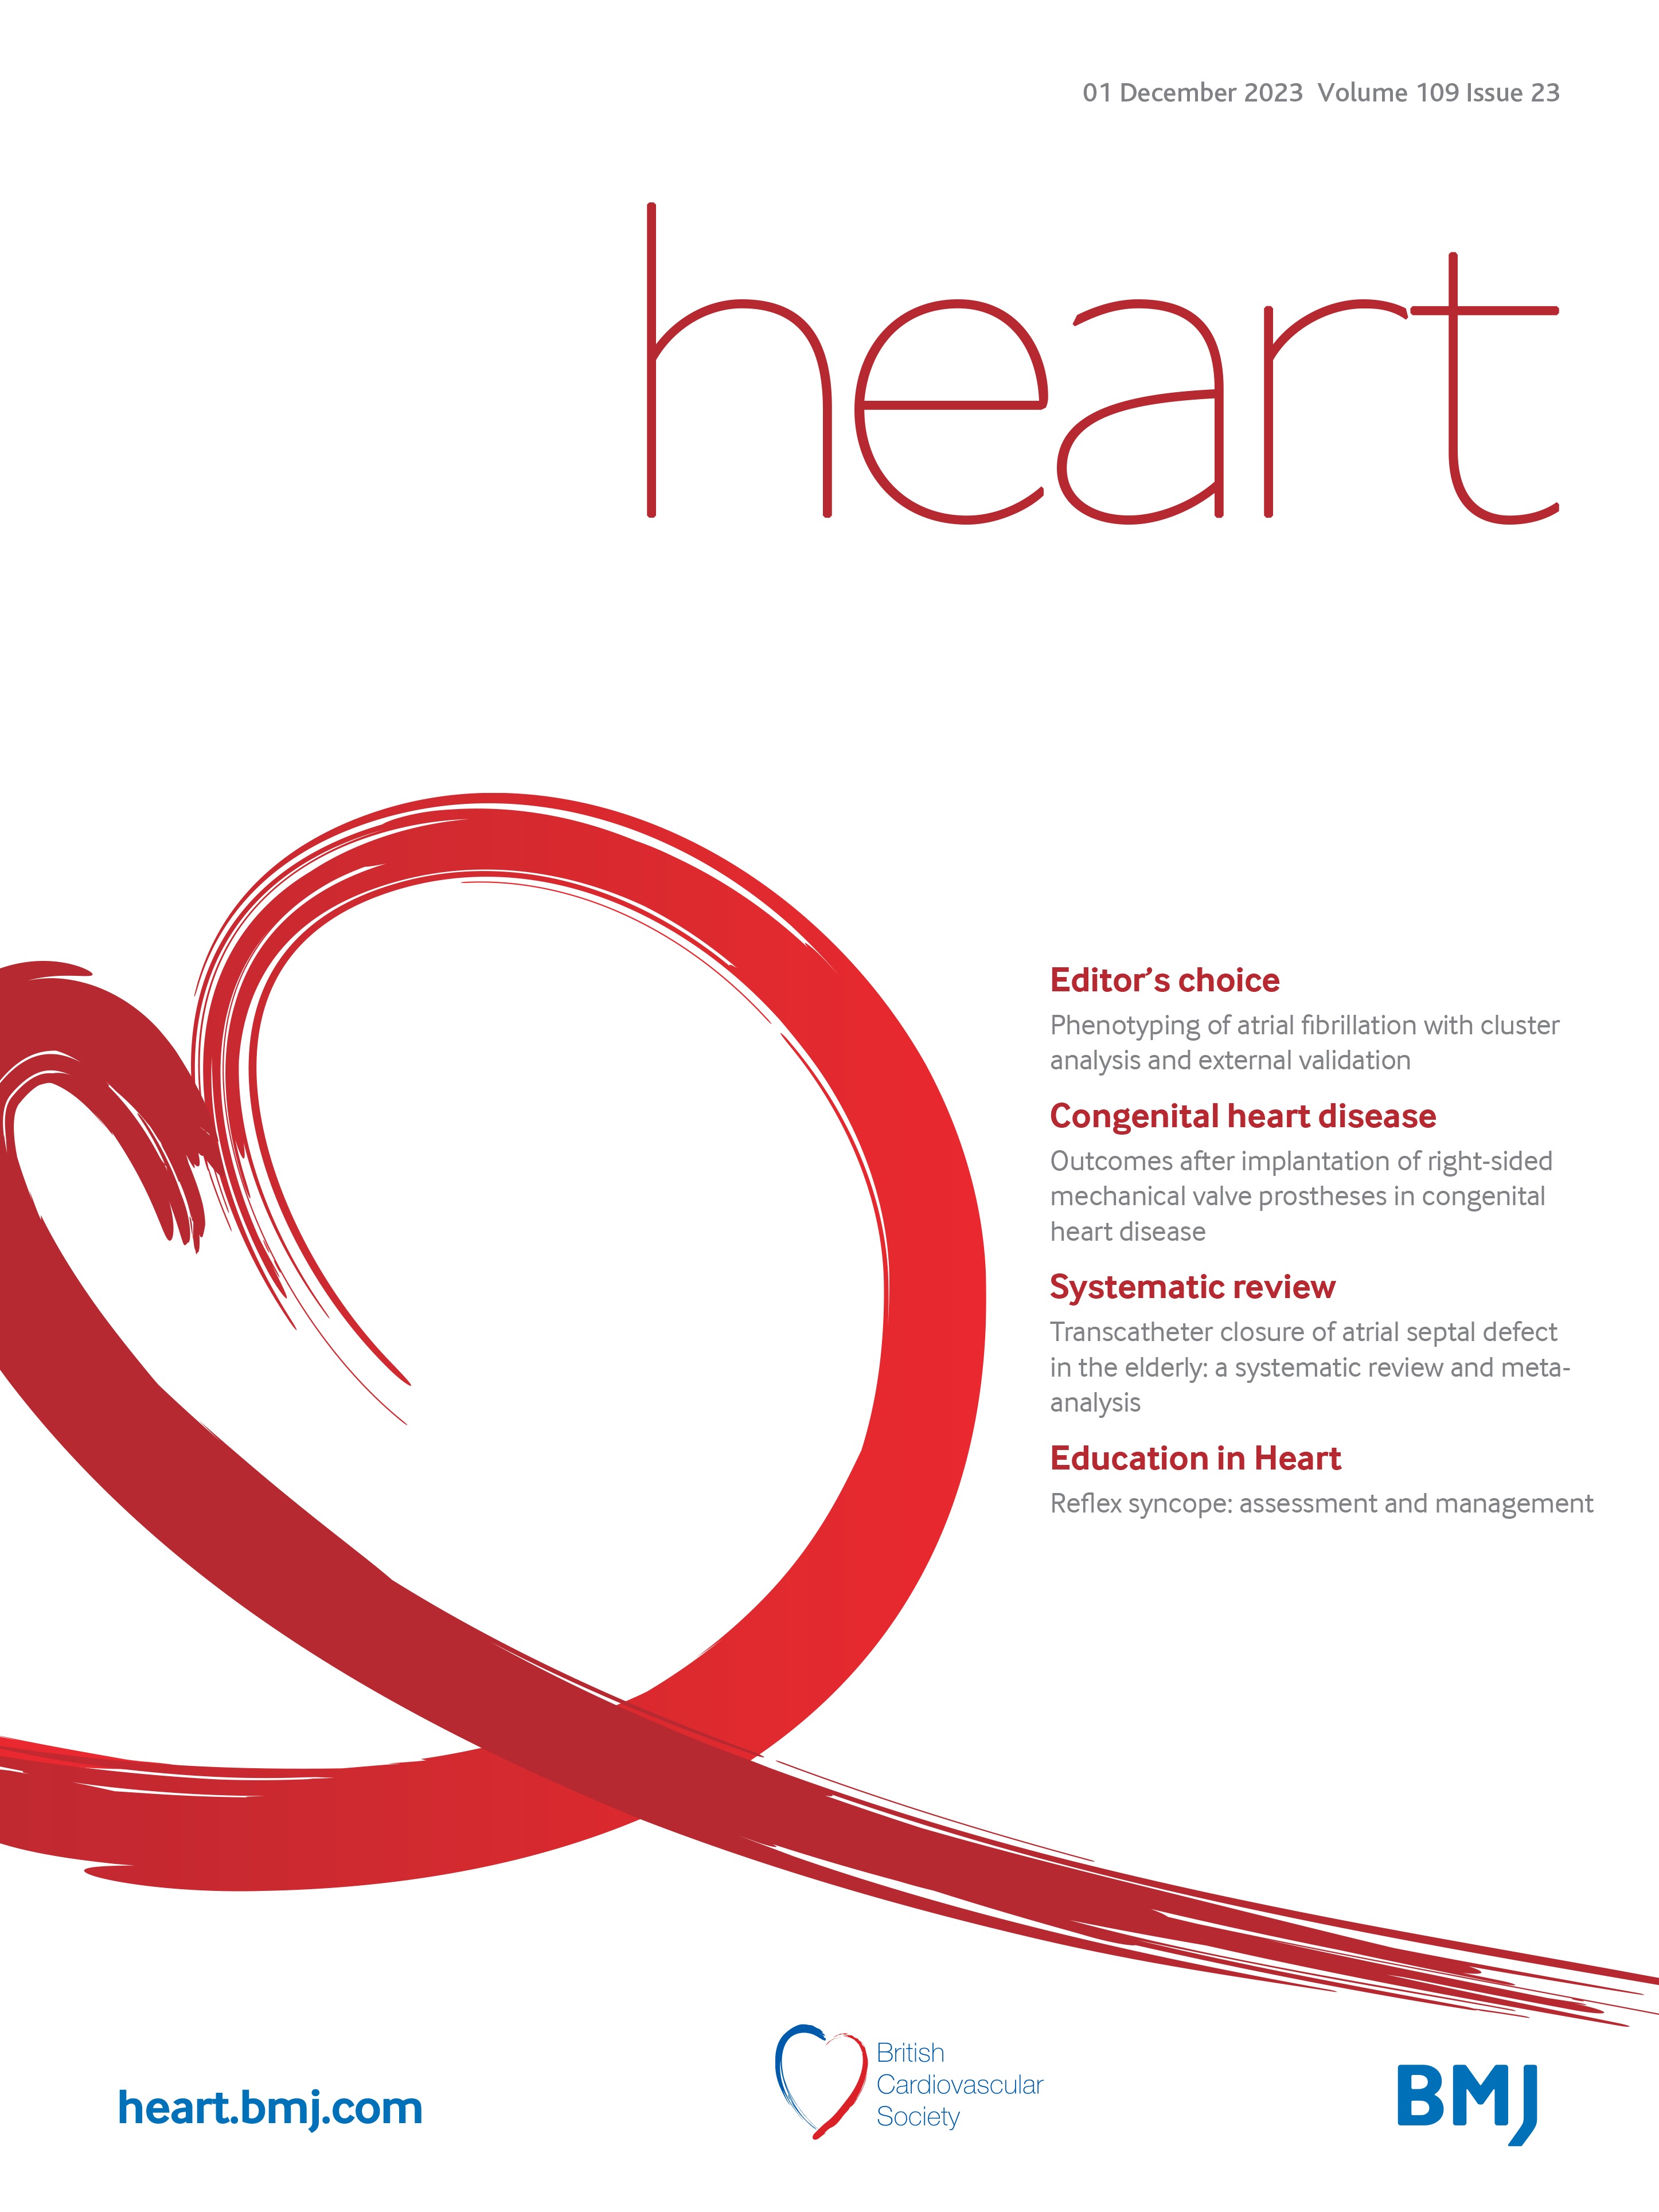 Transcatheter atrial septal defect closure in the elderly: the decisive role of balloon testing